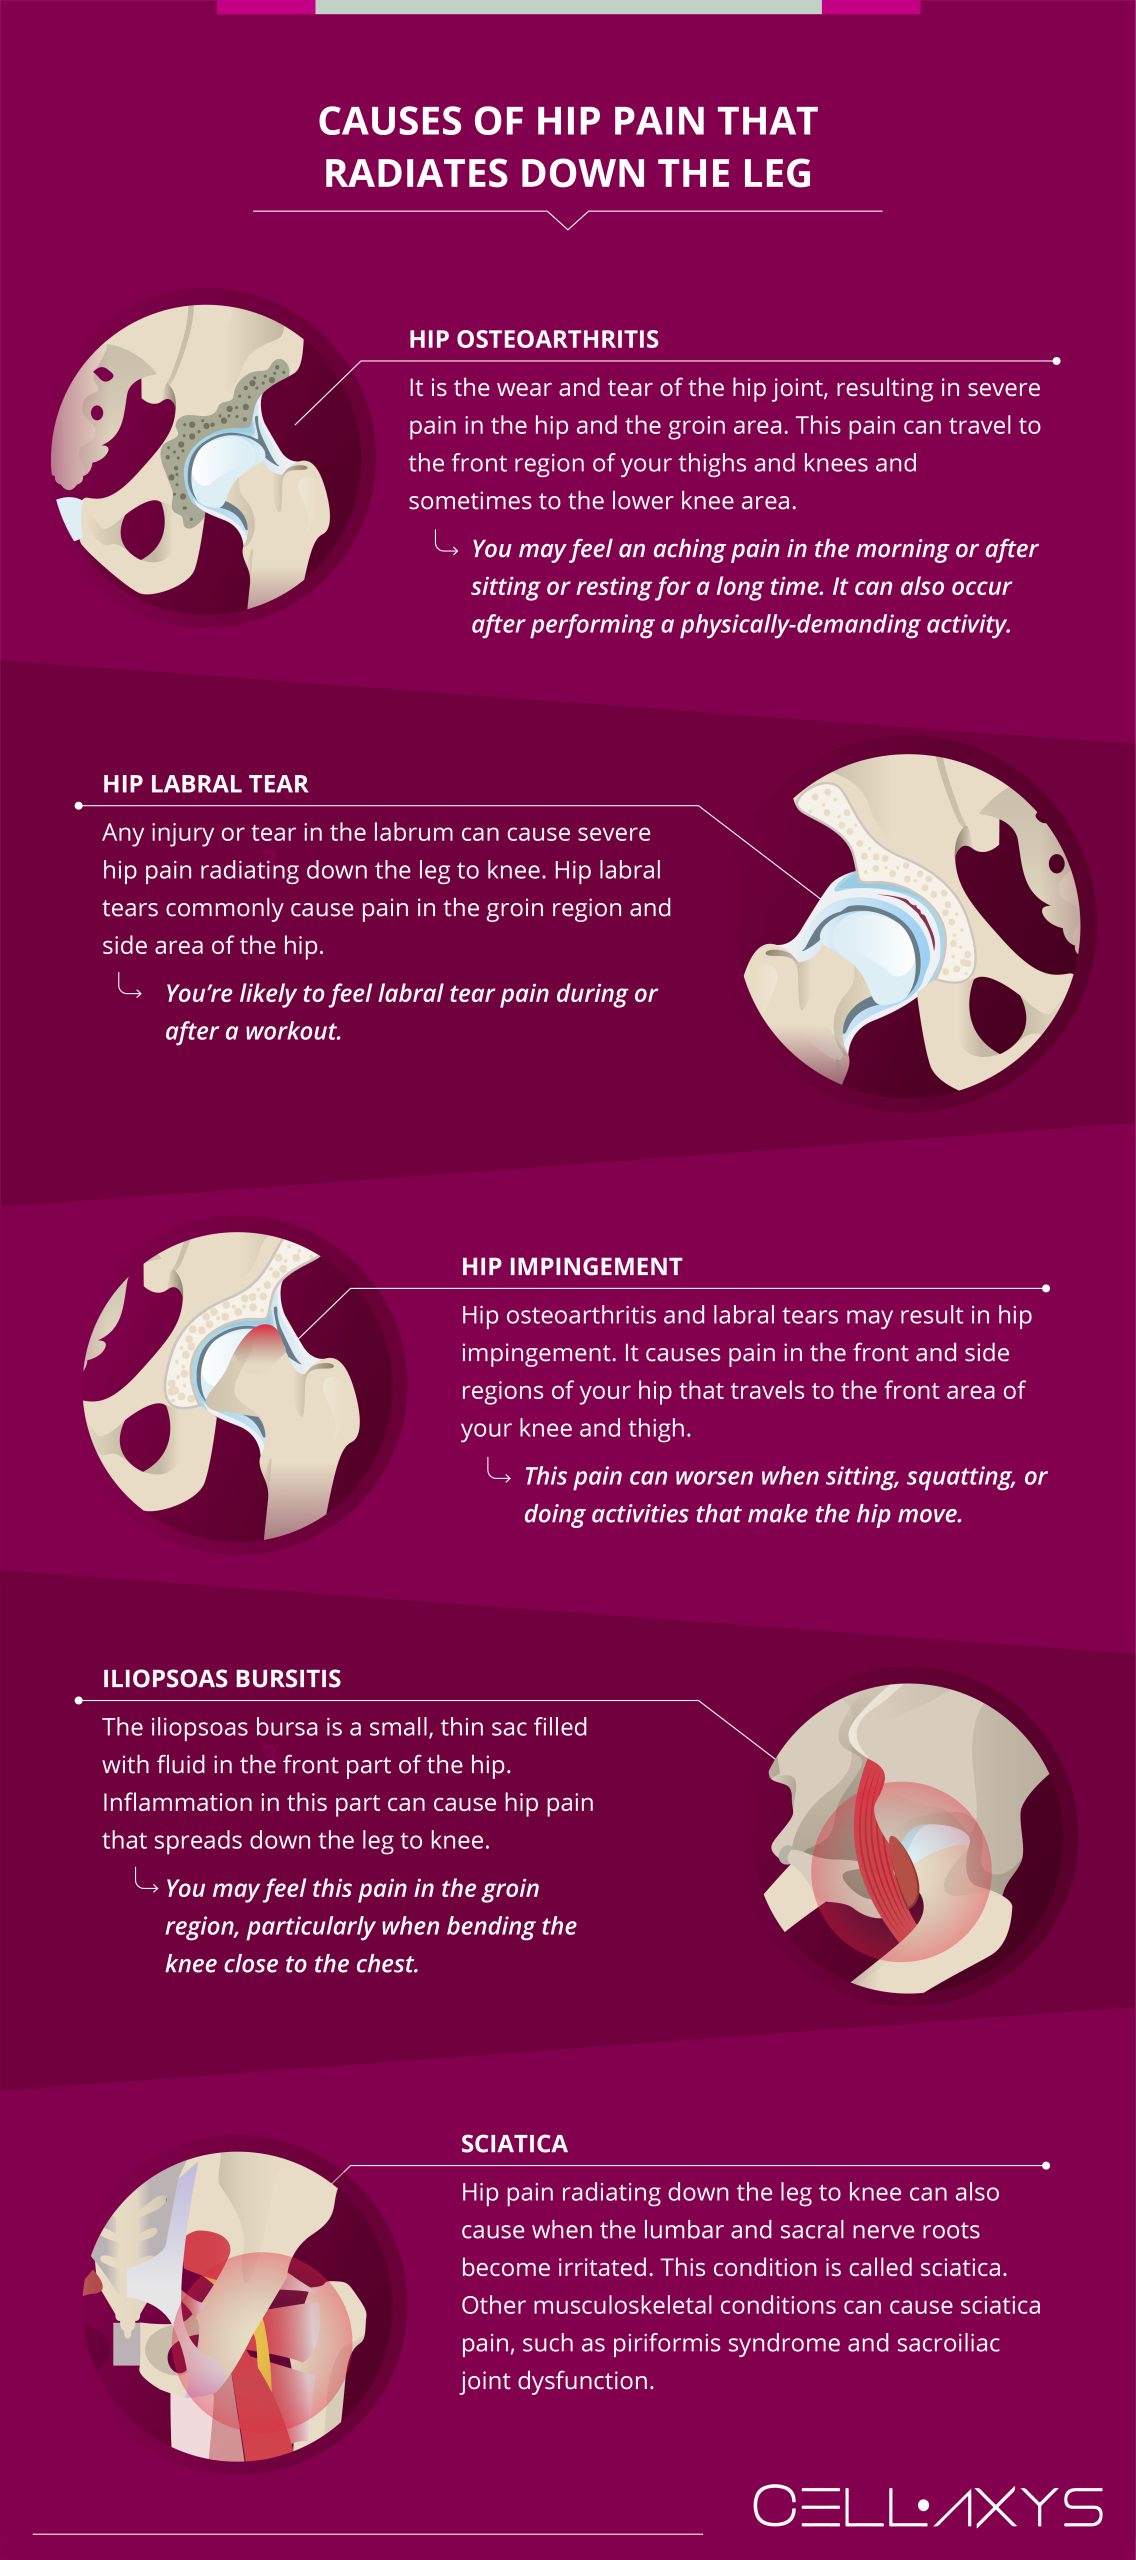 Causes of Hip Pain that Radiates Down the Leg 